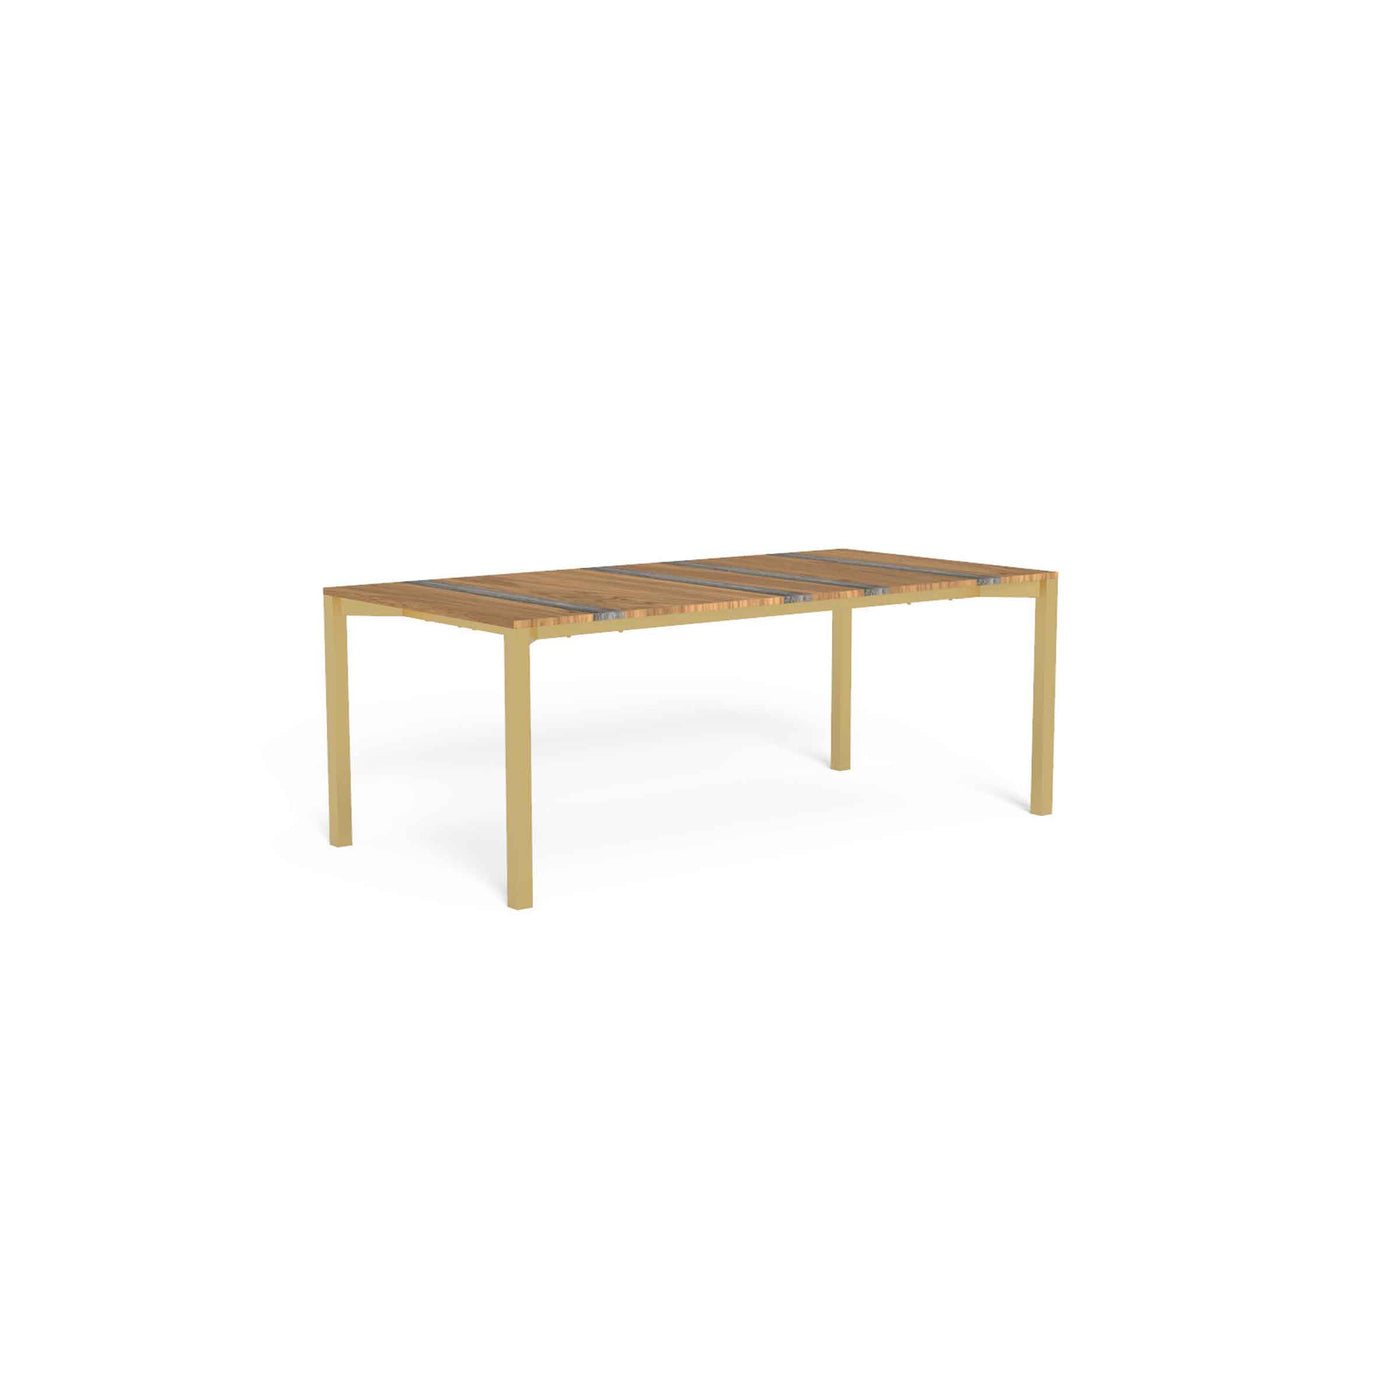 Outdoor Wood and Steel Dining Table CASILDA by Ramón Esteve for Talenti 013